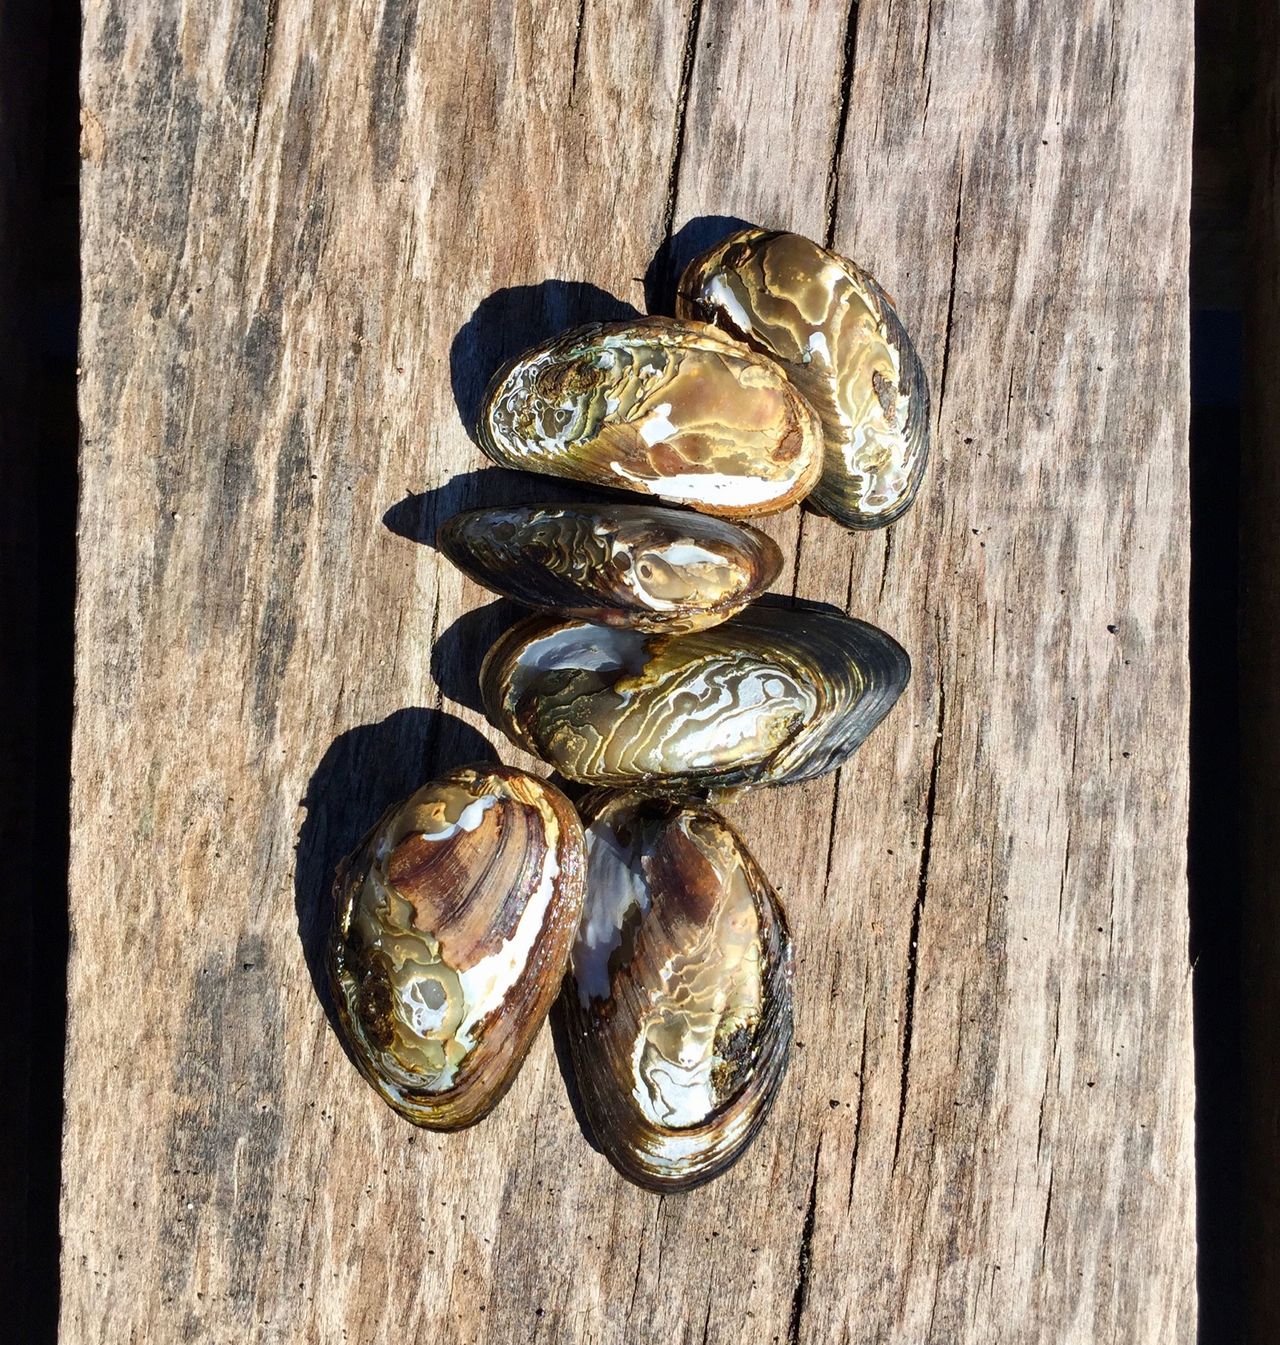 Mussels on a dock.